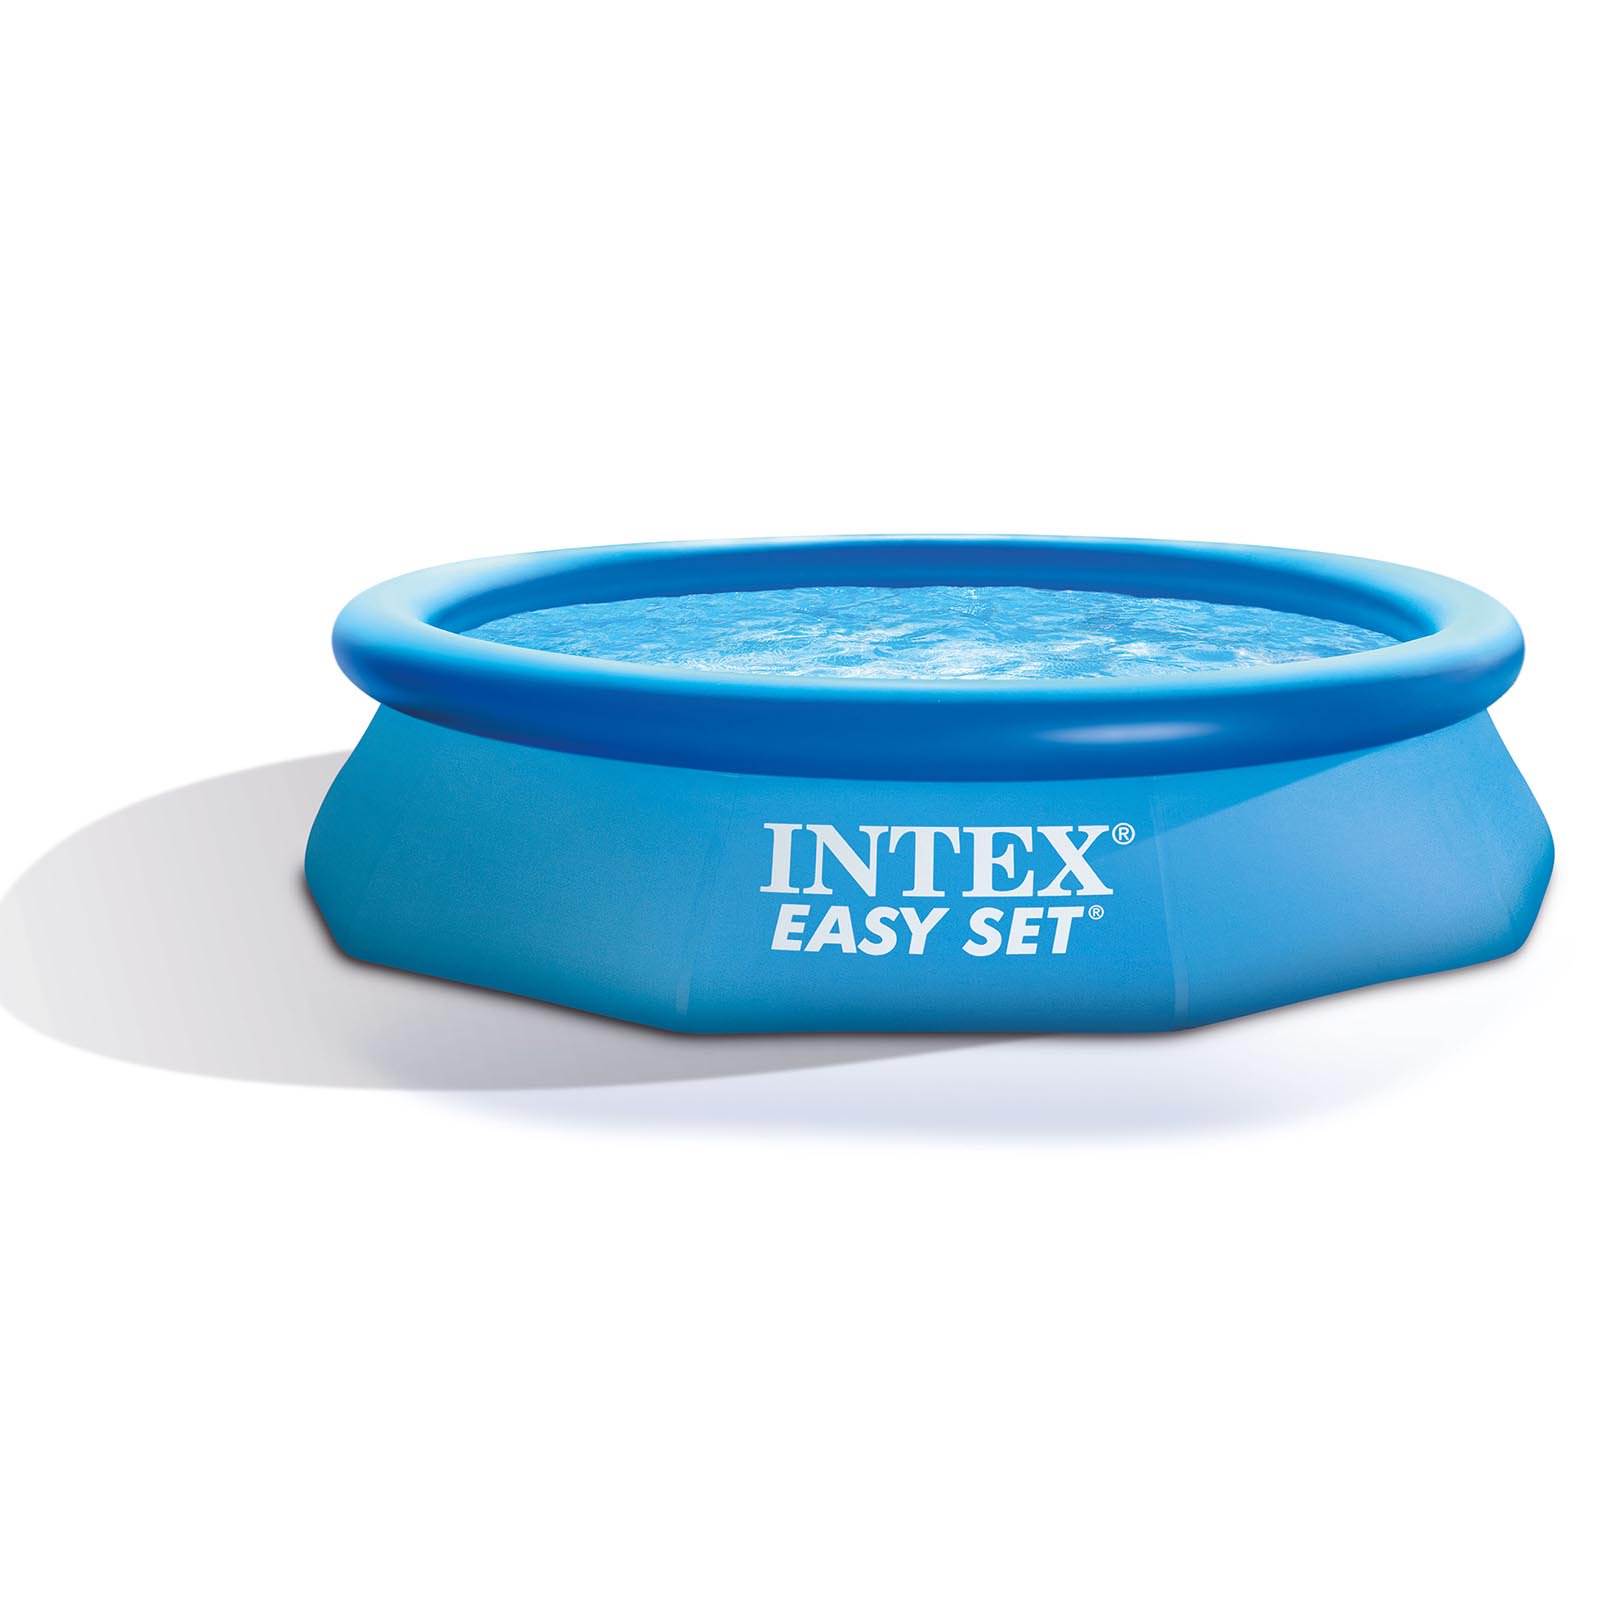 Intex Easy Set 10 Ft x 30 In Above Ground Inflatable Round Swimming Pool - image 1 of 9